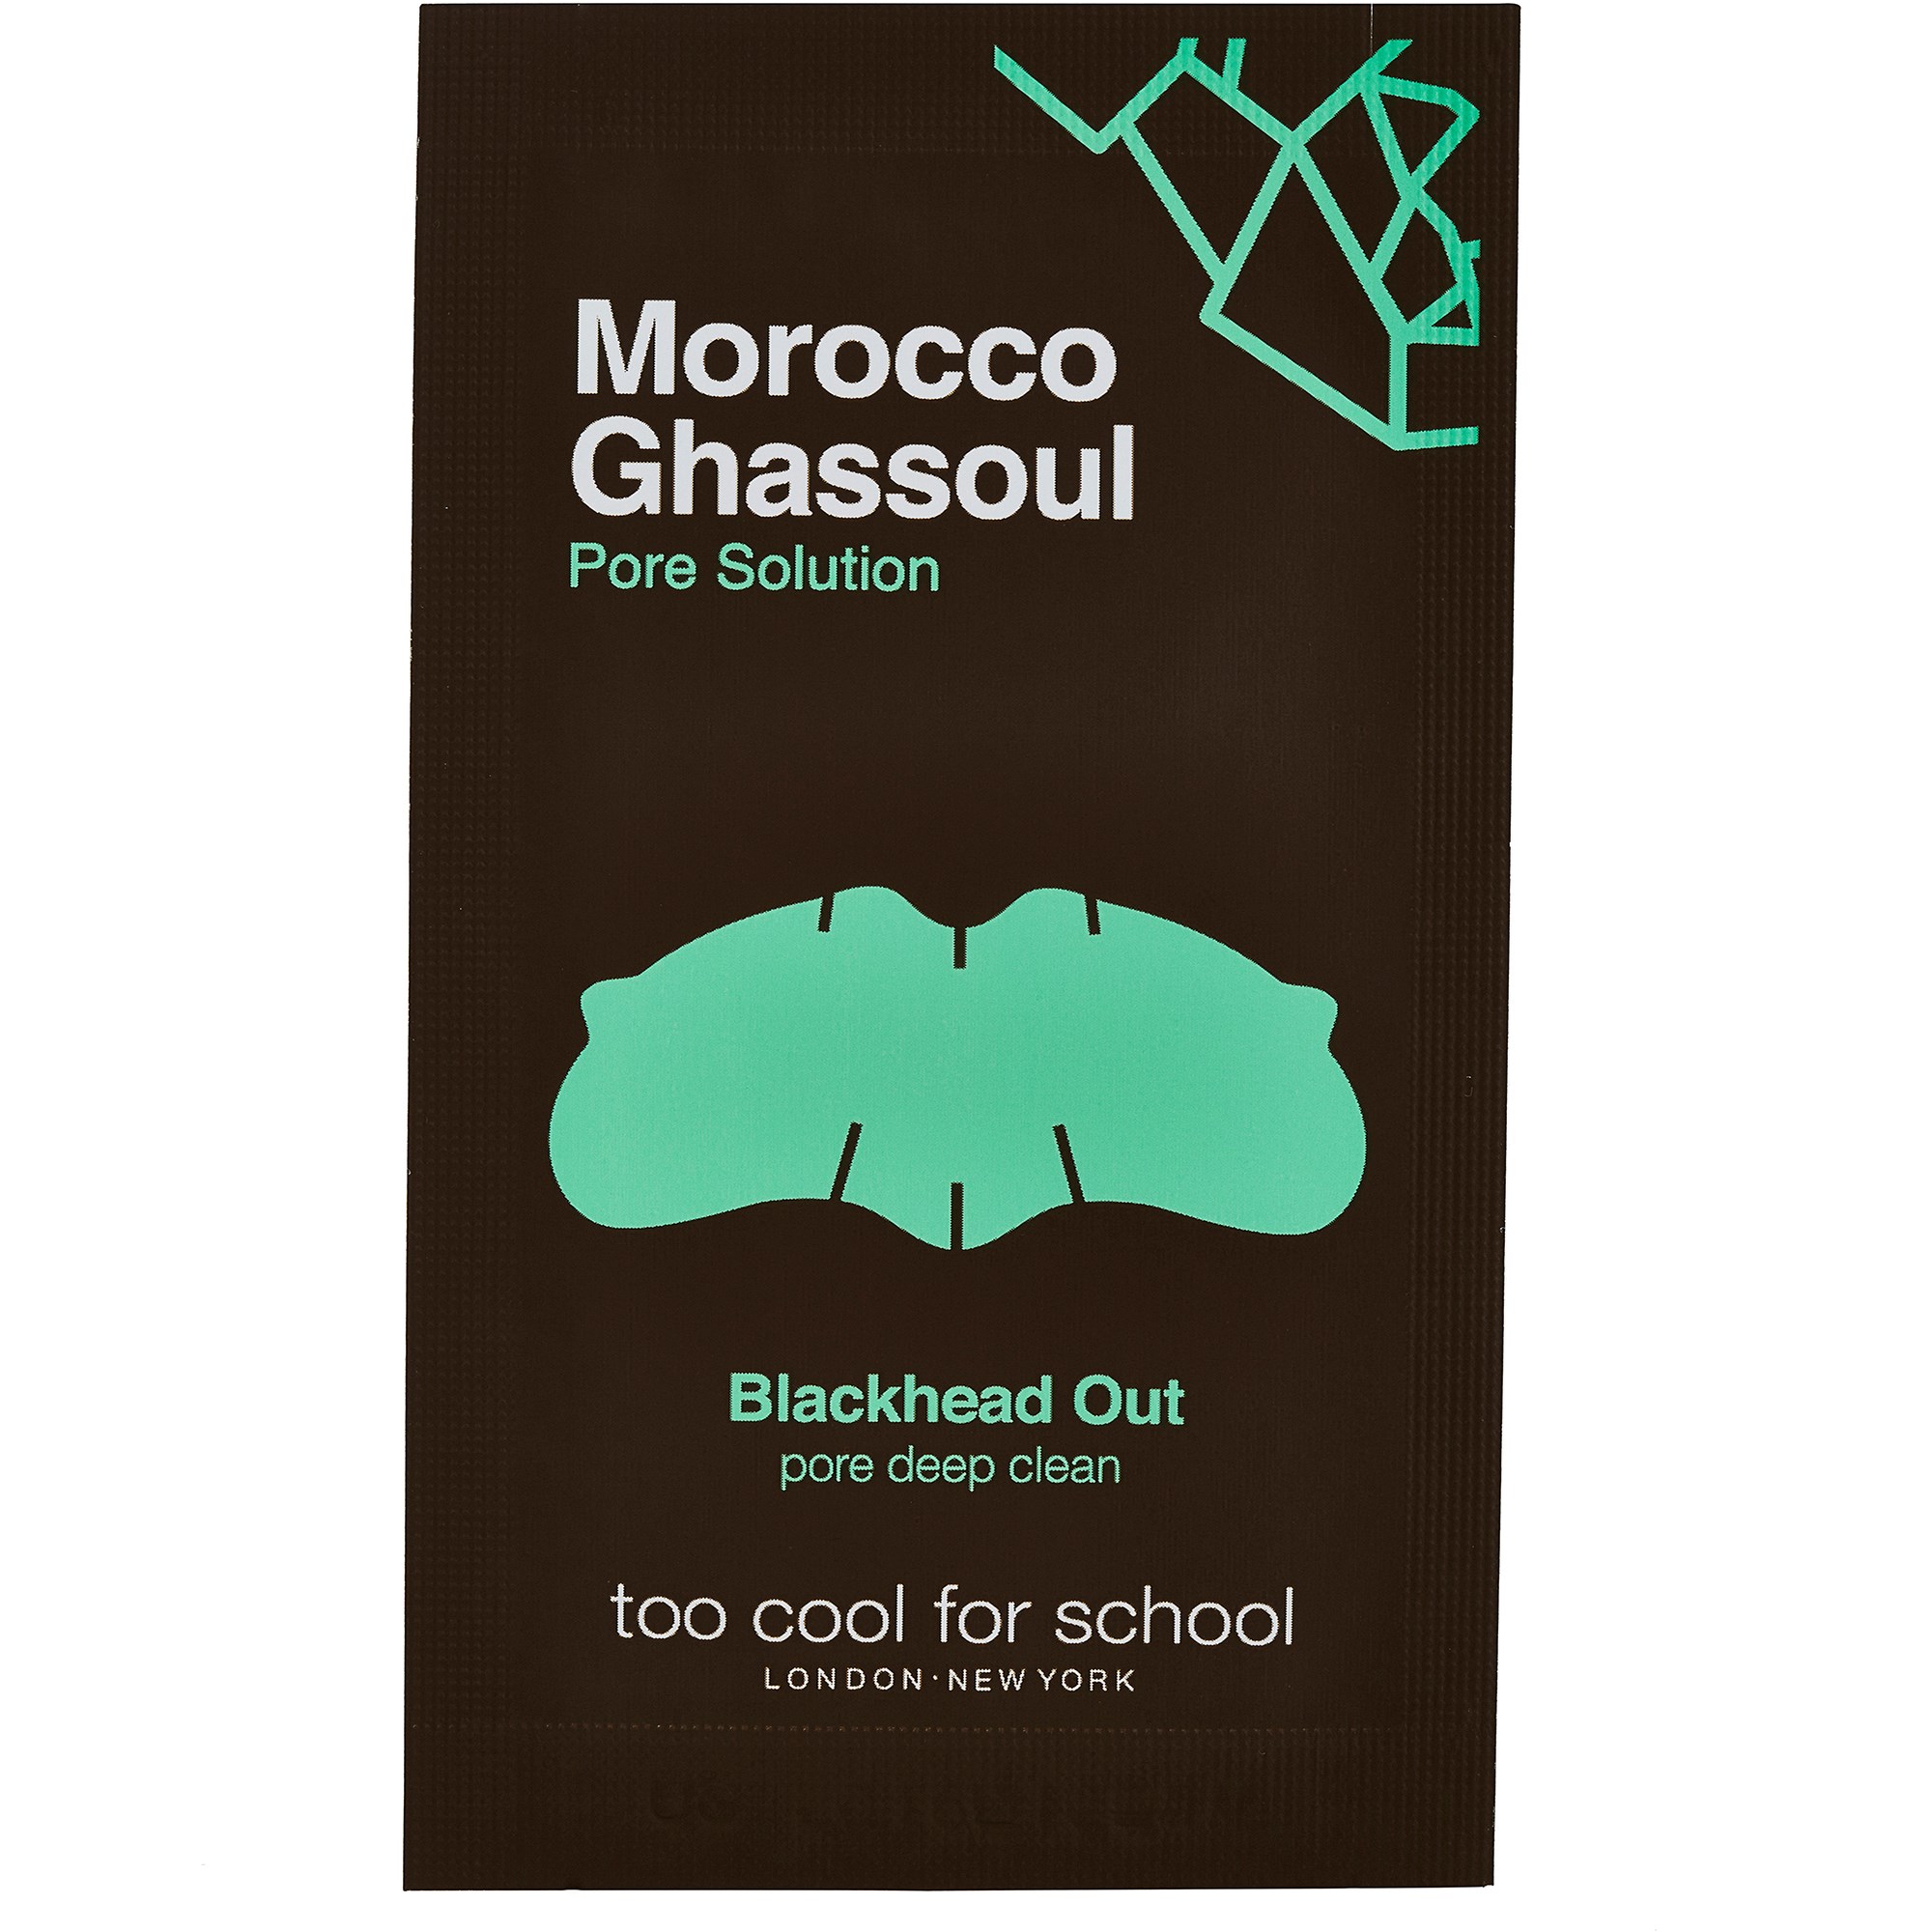 Too Cool For School Morocco Ghassoul Blackhead Out 1 st